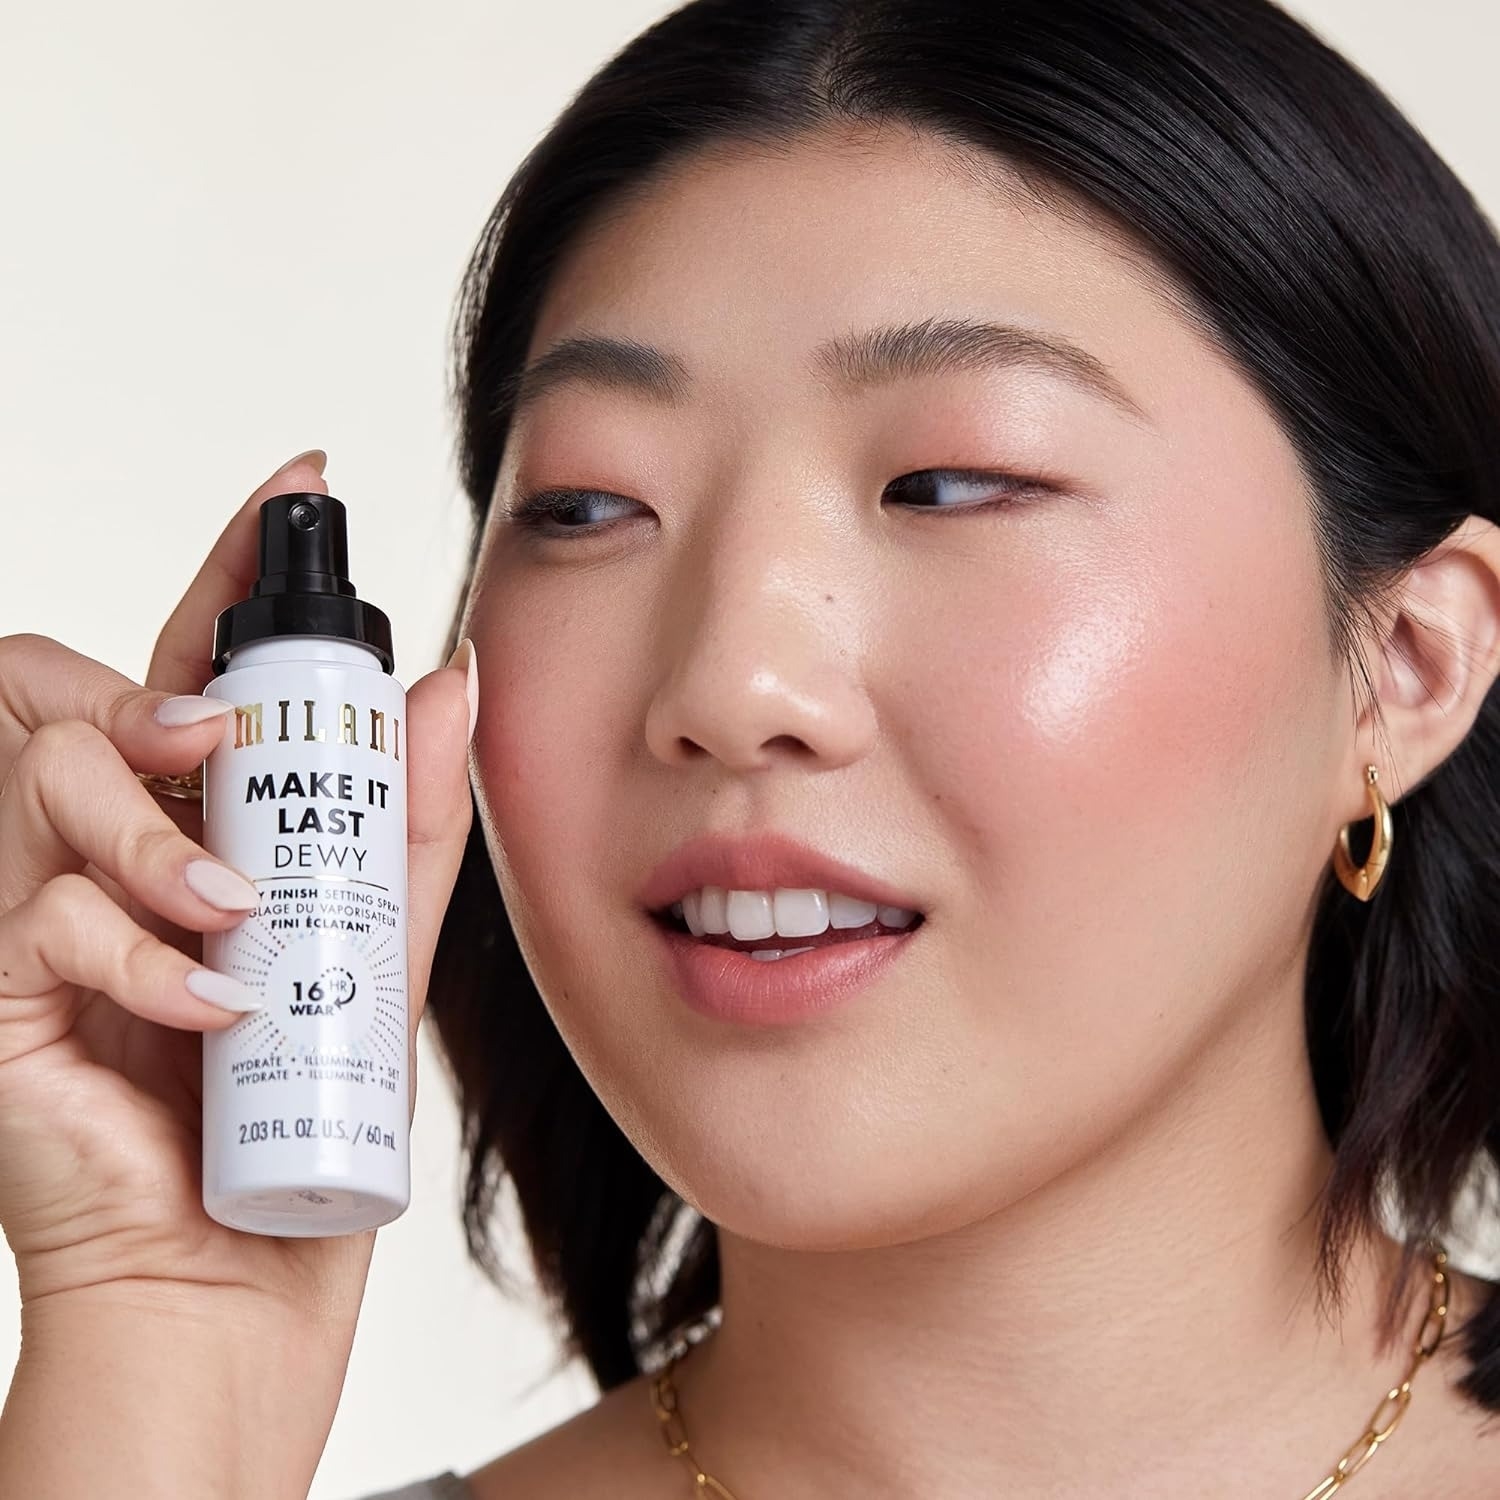 A model holding Milani&#x27;s Make It Last Dewy setting spray close to their face, showing a happy expression